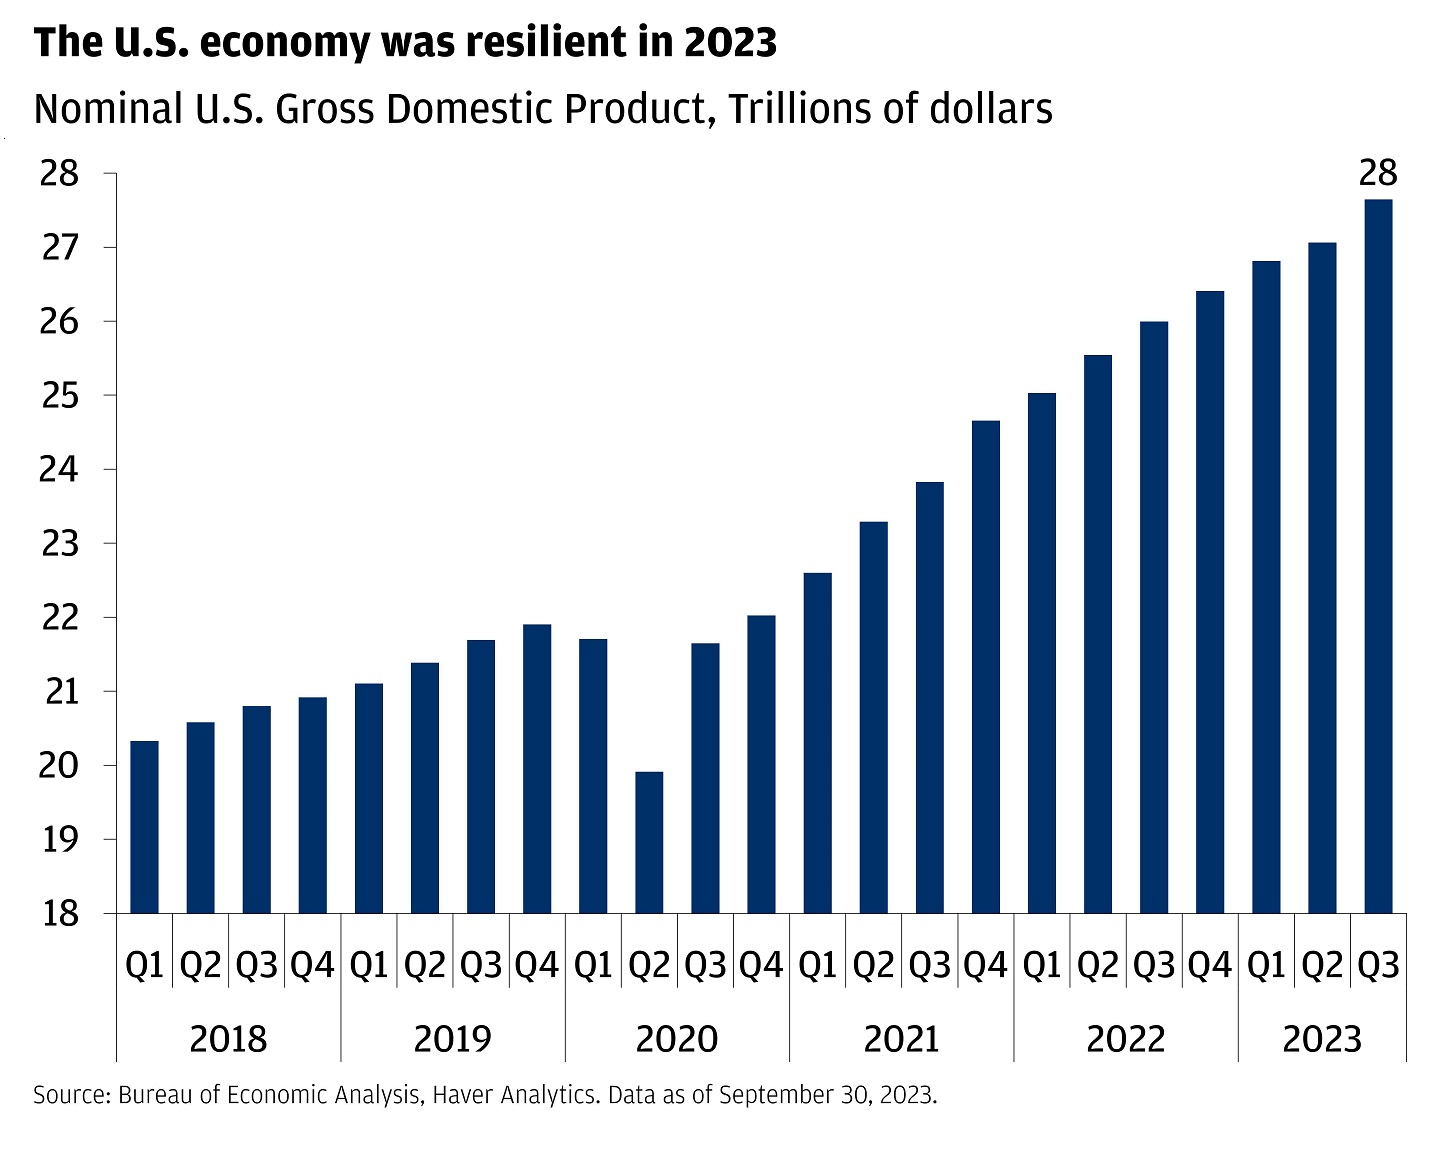 This graph shows that the U.S. economy was resilient in 2023 by the Nominal U.S. Gross Domestic Product, Trillions of dollars.